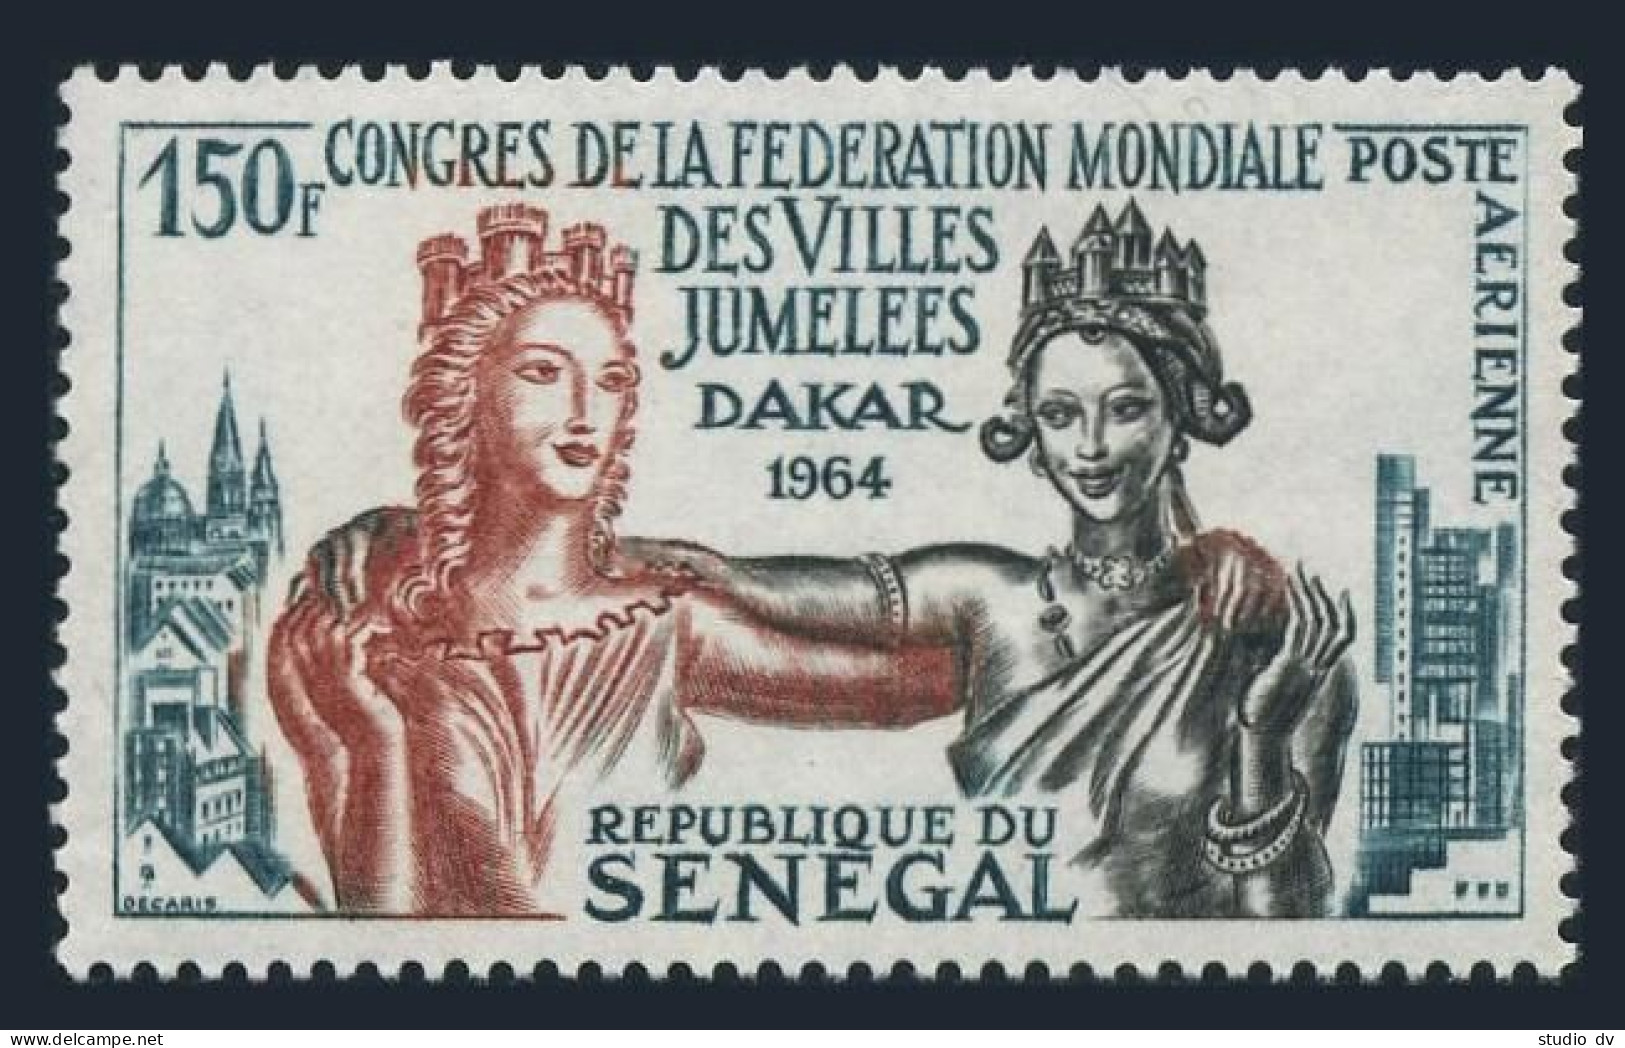 Senegal C35,hinged.Michel 280. Federation Of Twin Cities,1964. - Sénégal (1960-...)